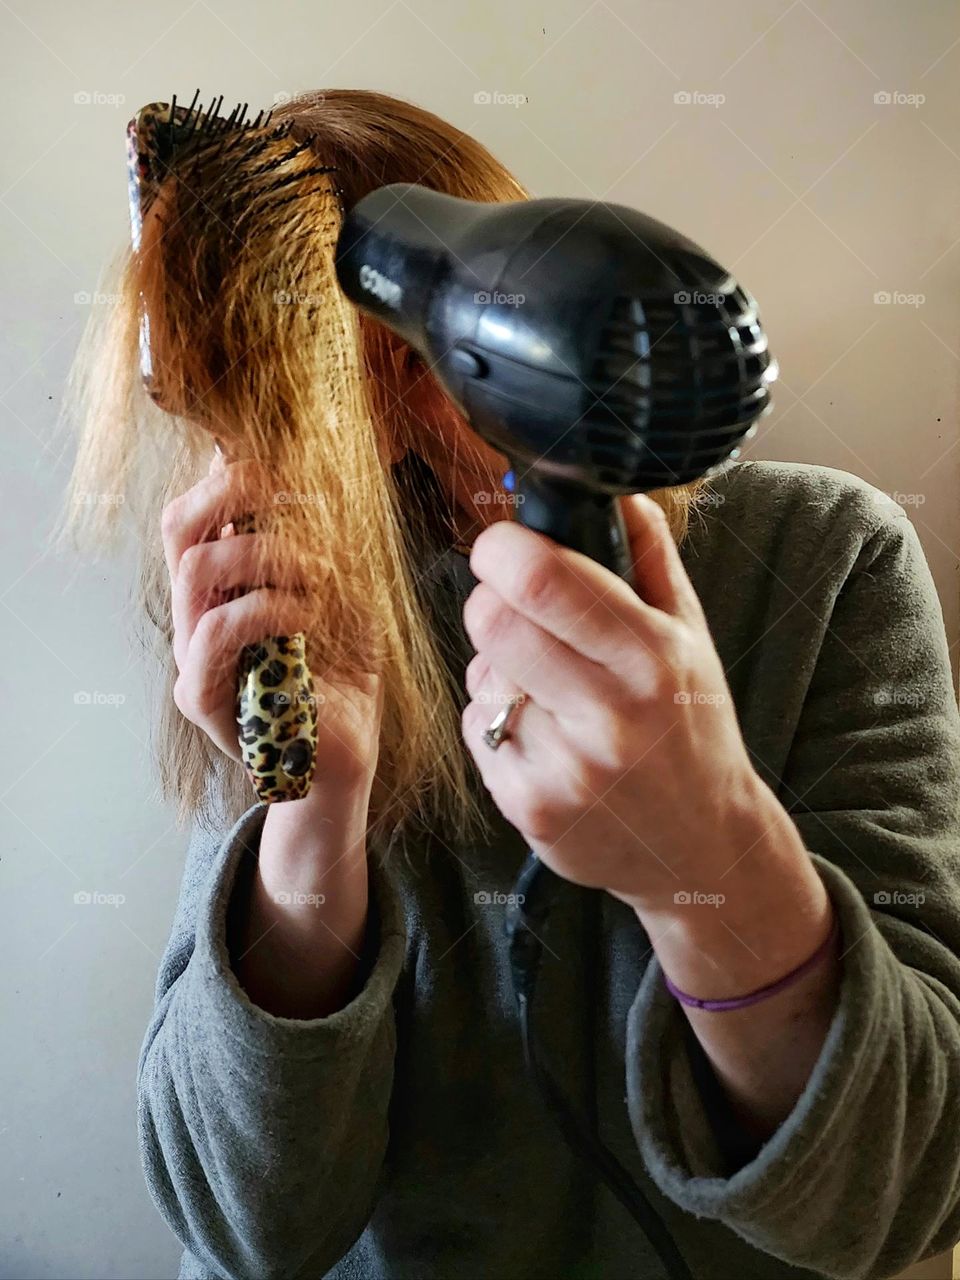 Blow drying my hair.